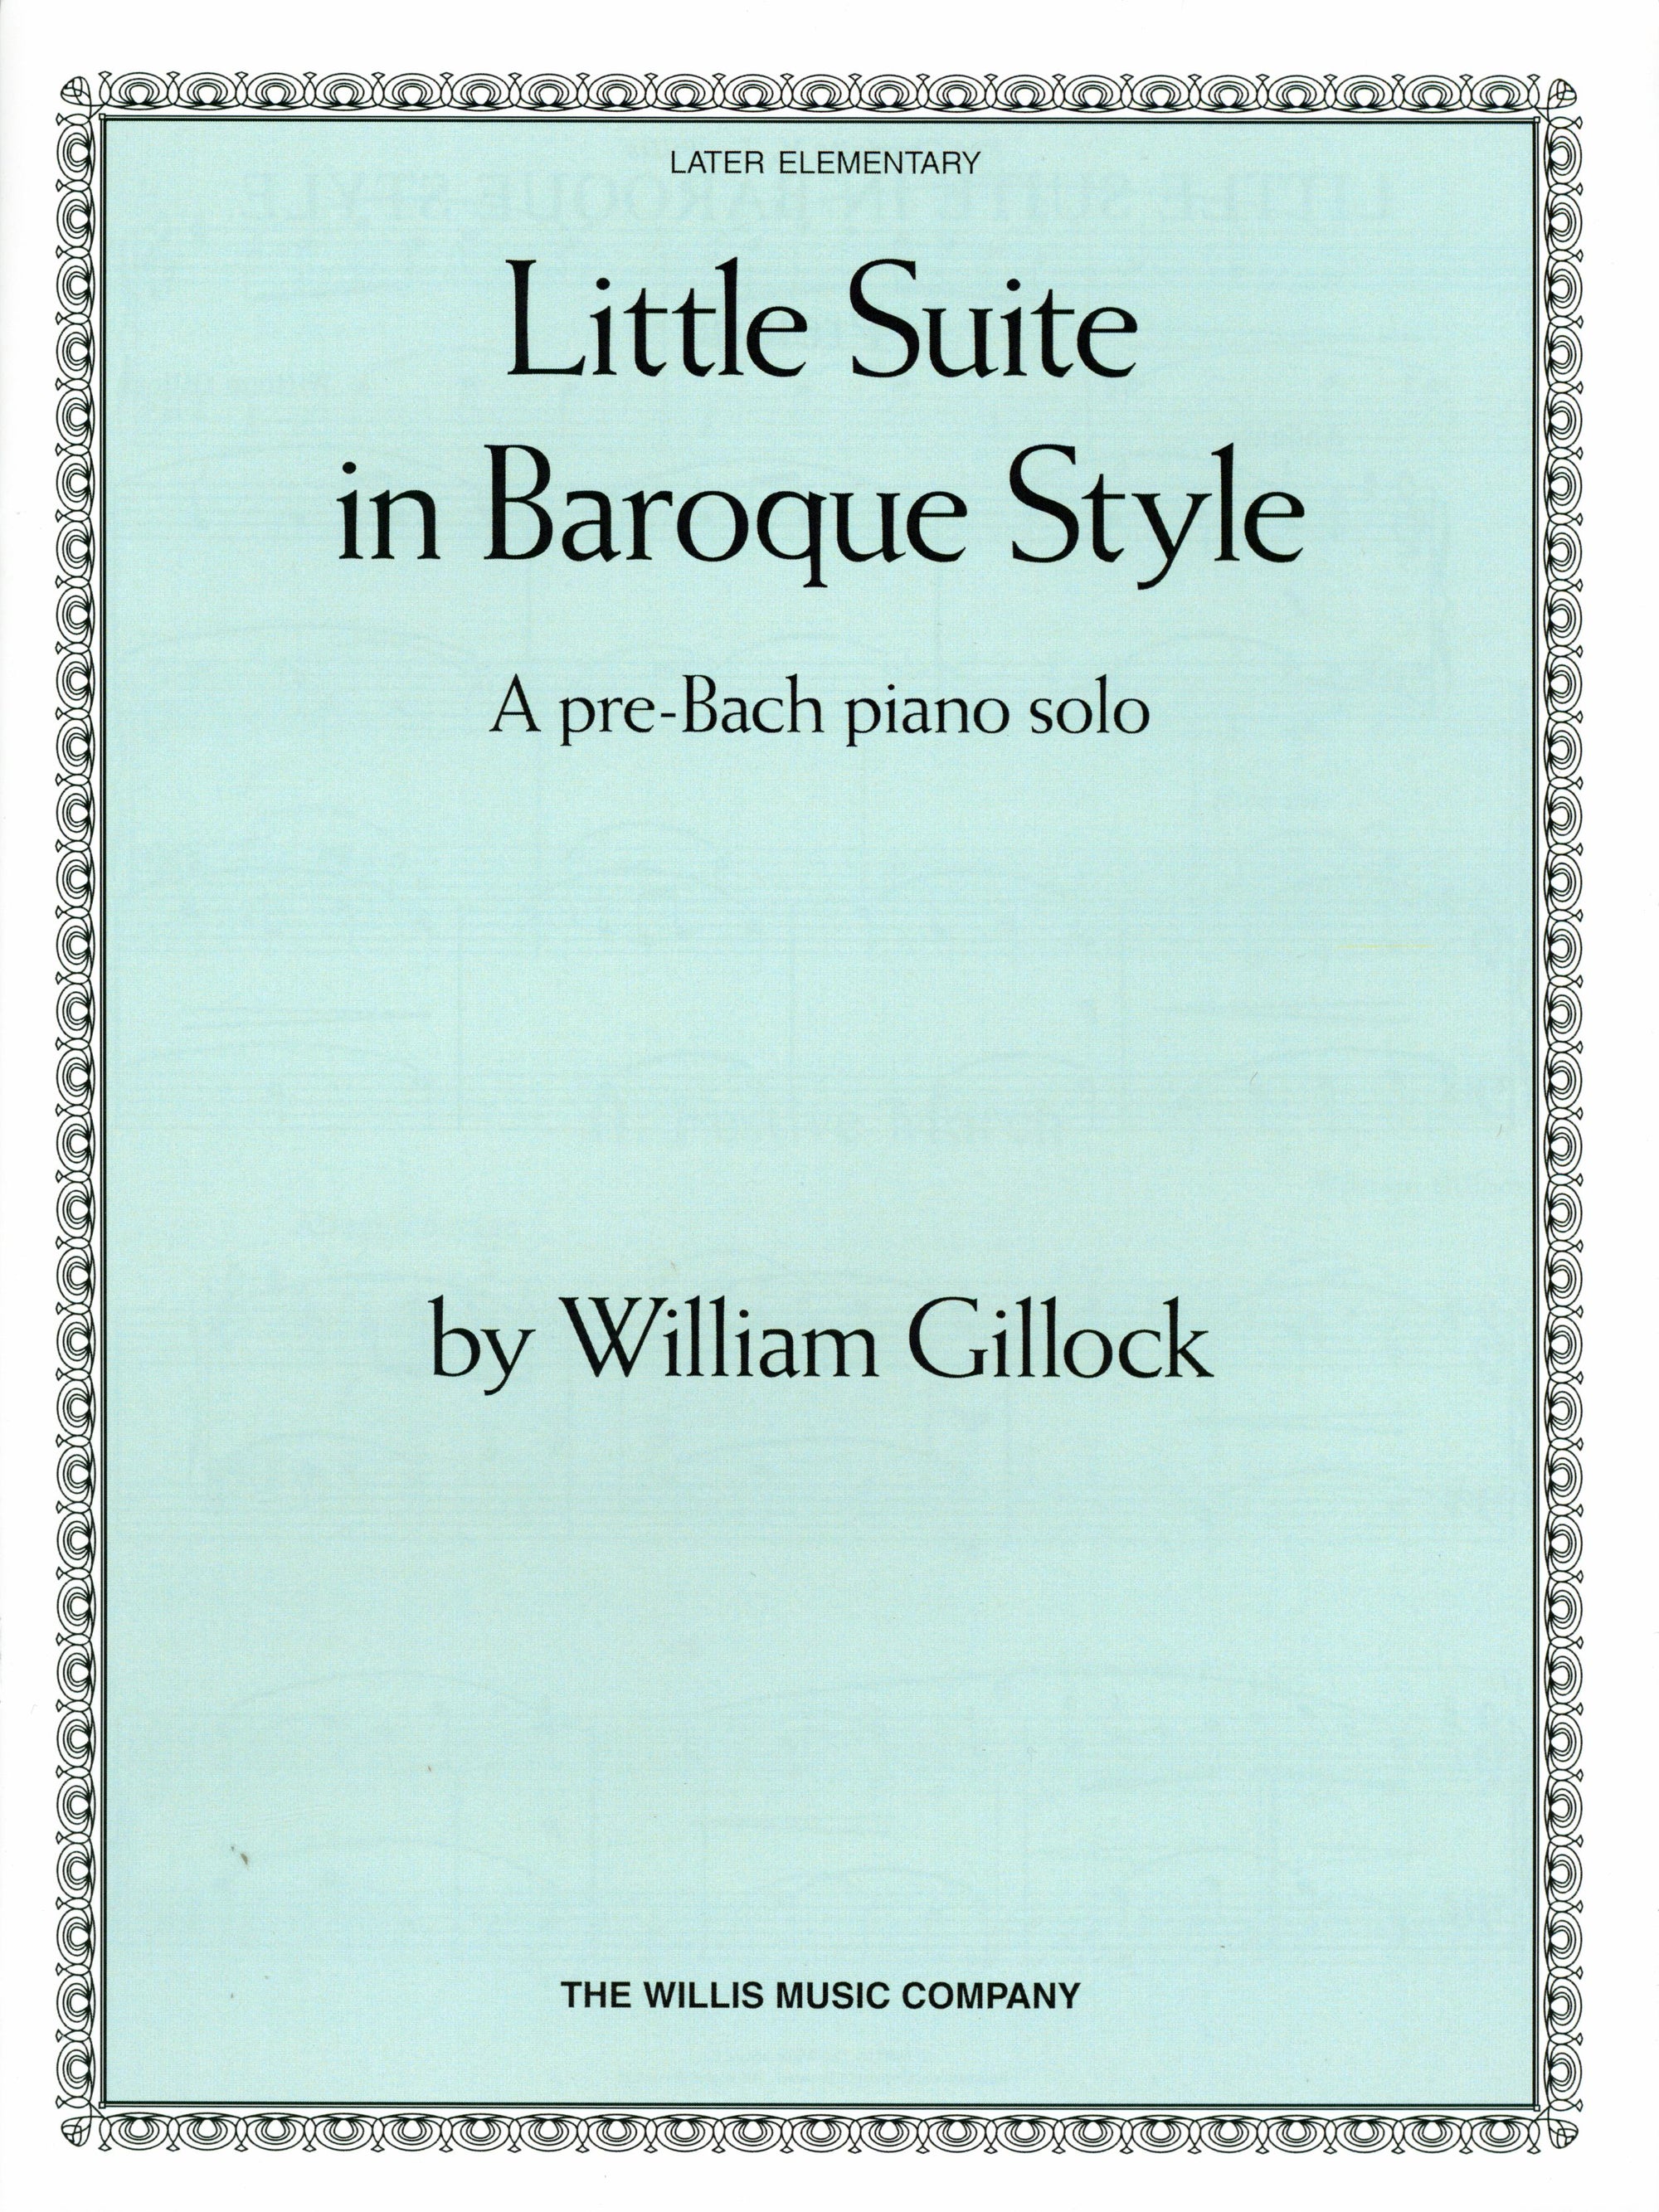 Gillock: Little Suite in Baroque Style